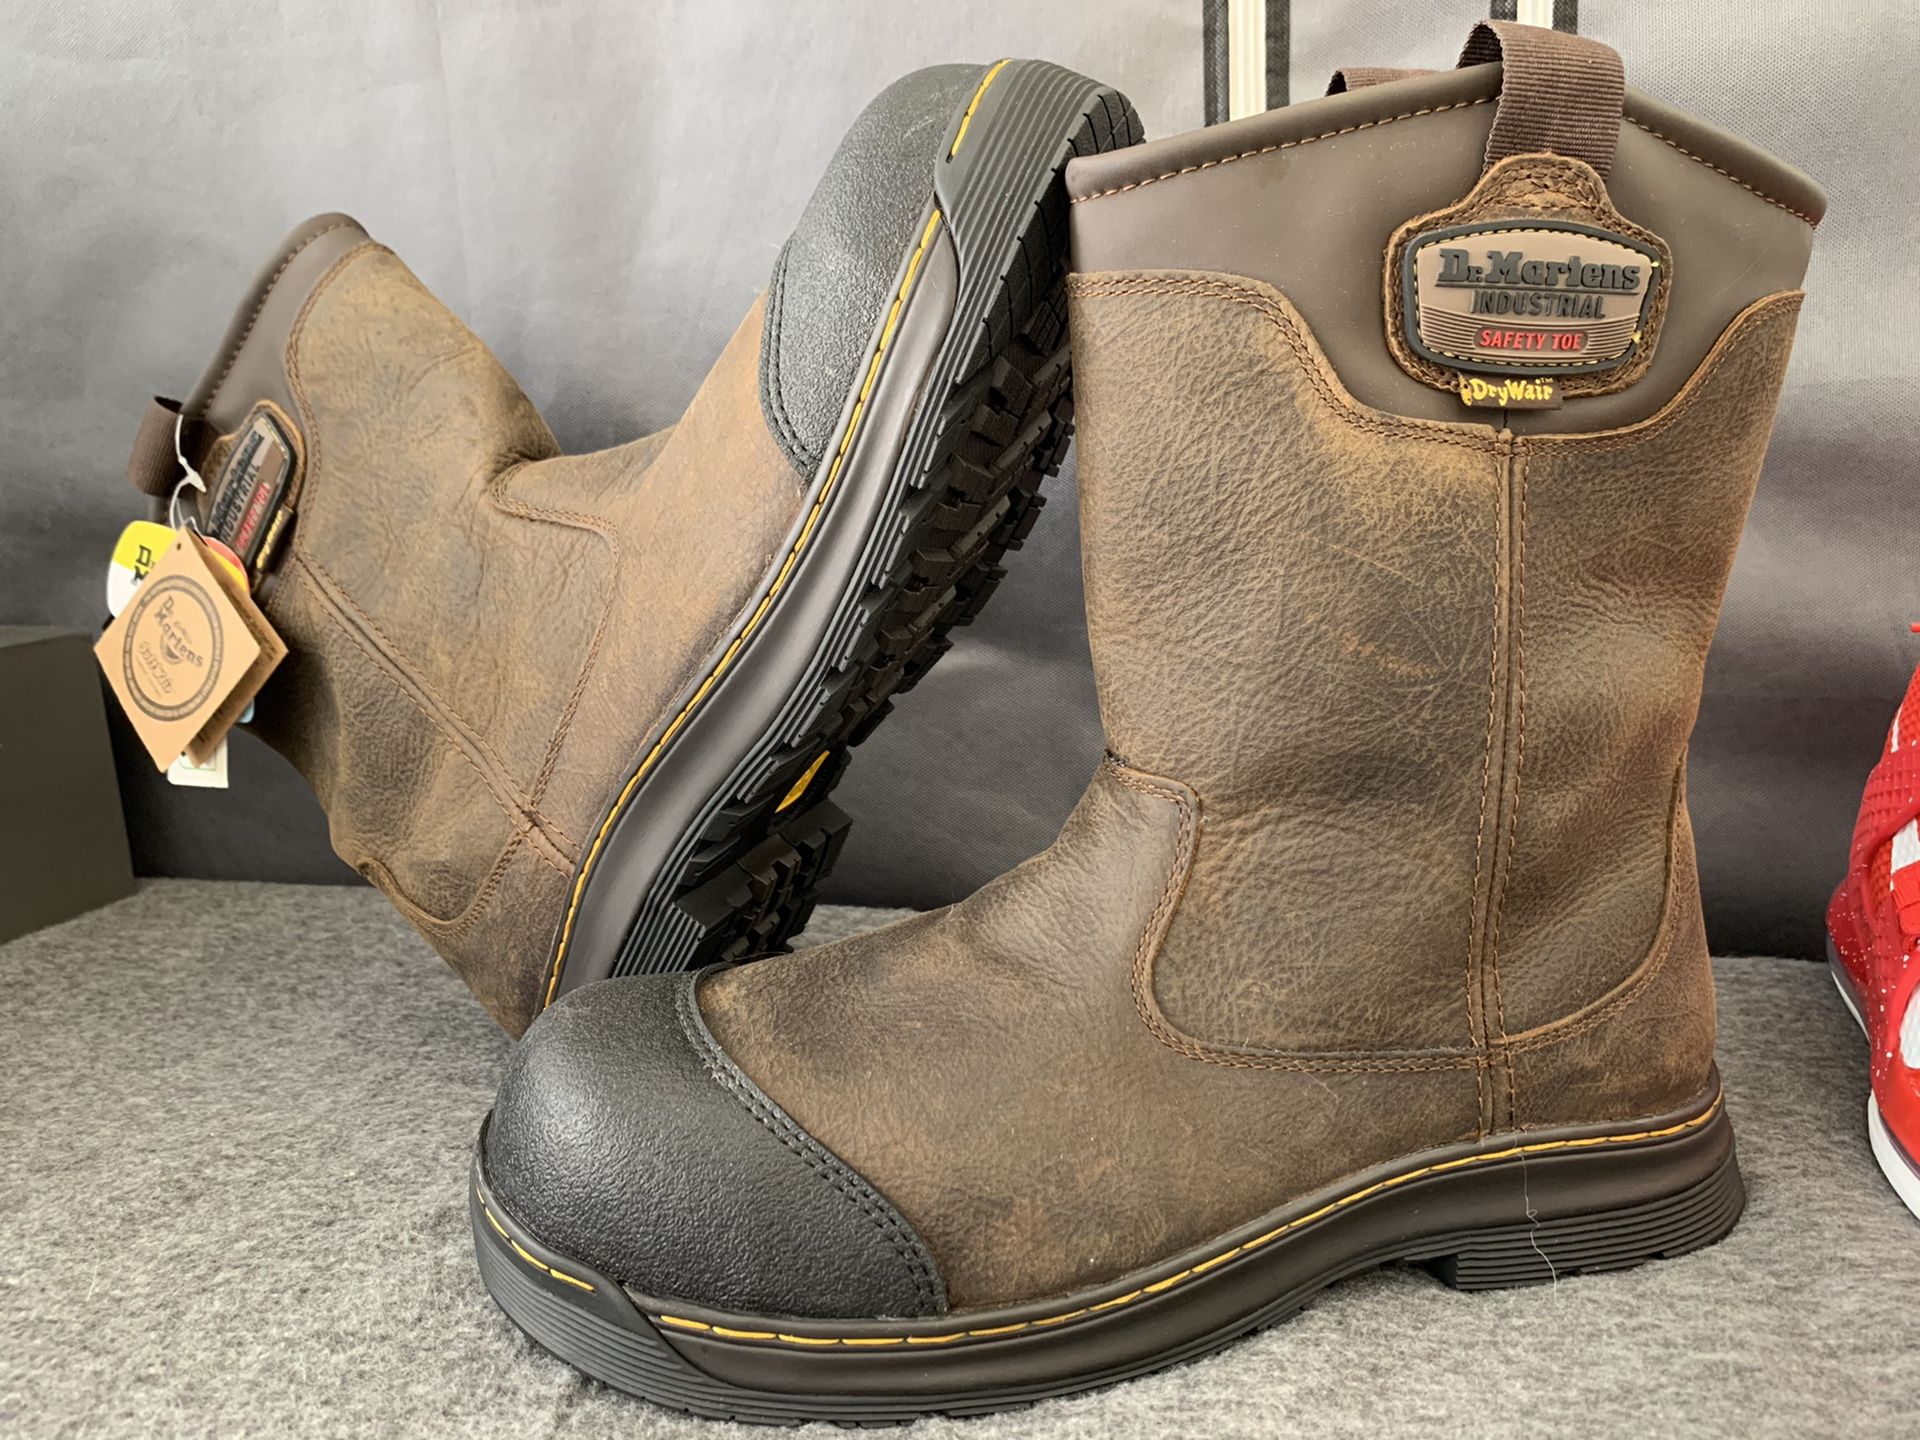 Dr Martens Work Boots Botas de Trabajo Safety Toe Industrial Series Drywair Softwair Comfort BRAND NEW